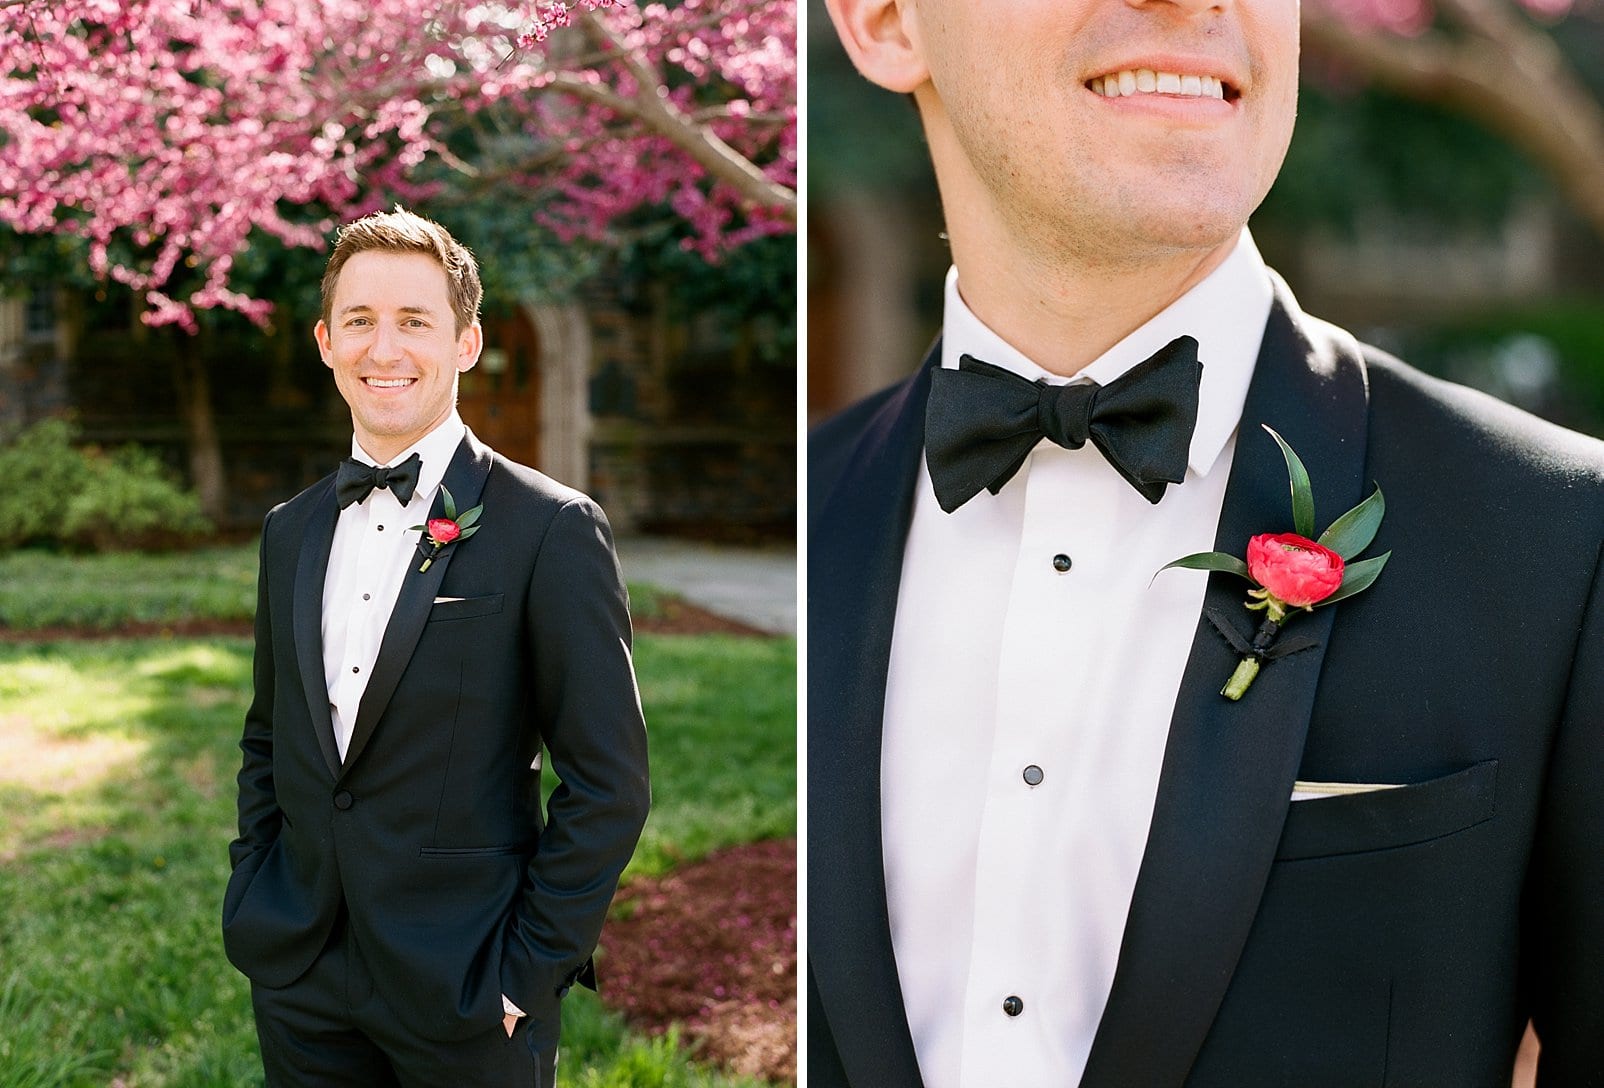 Artfully Arranged boutonniere with pink flower photo